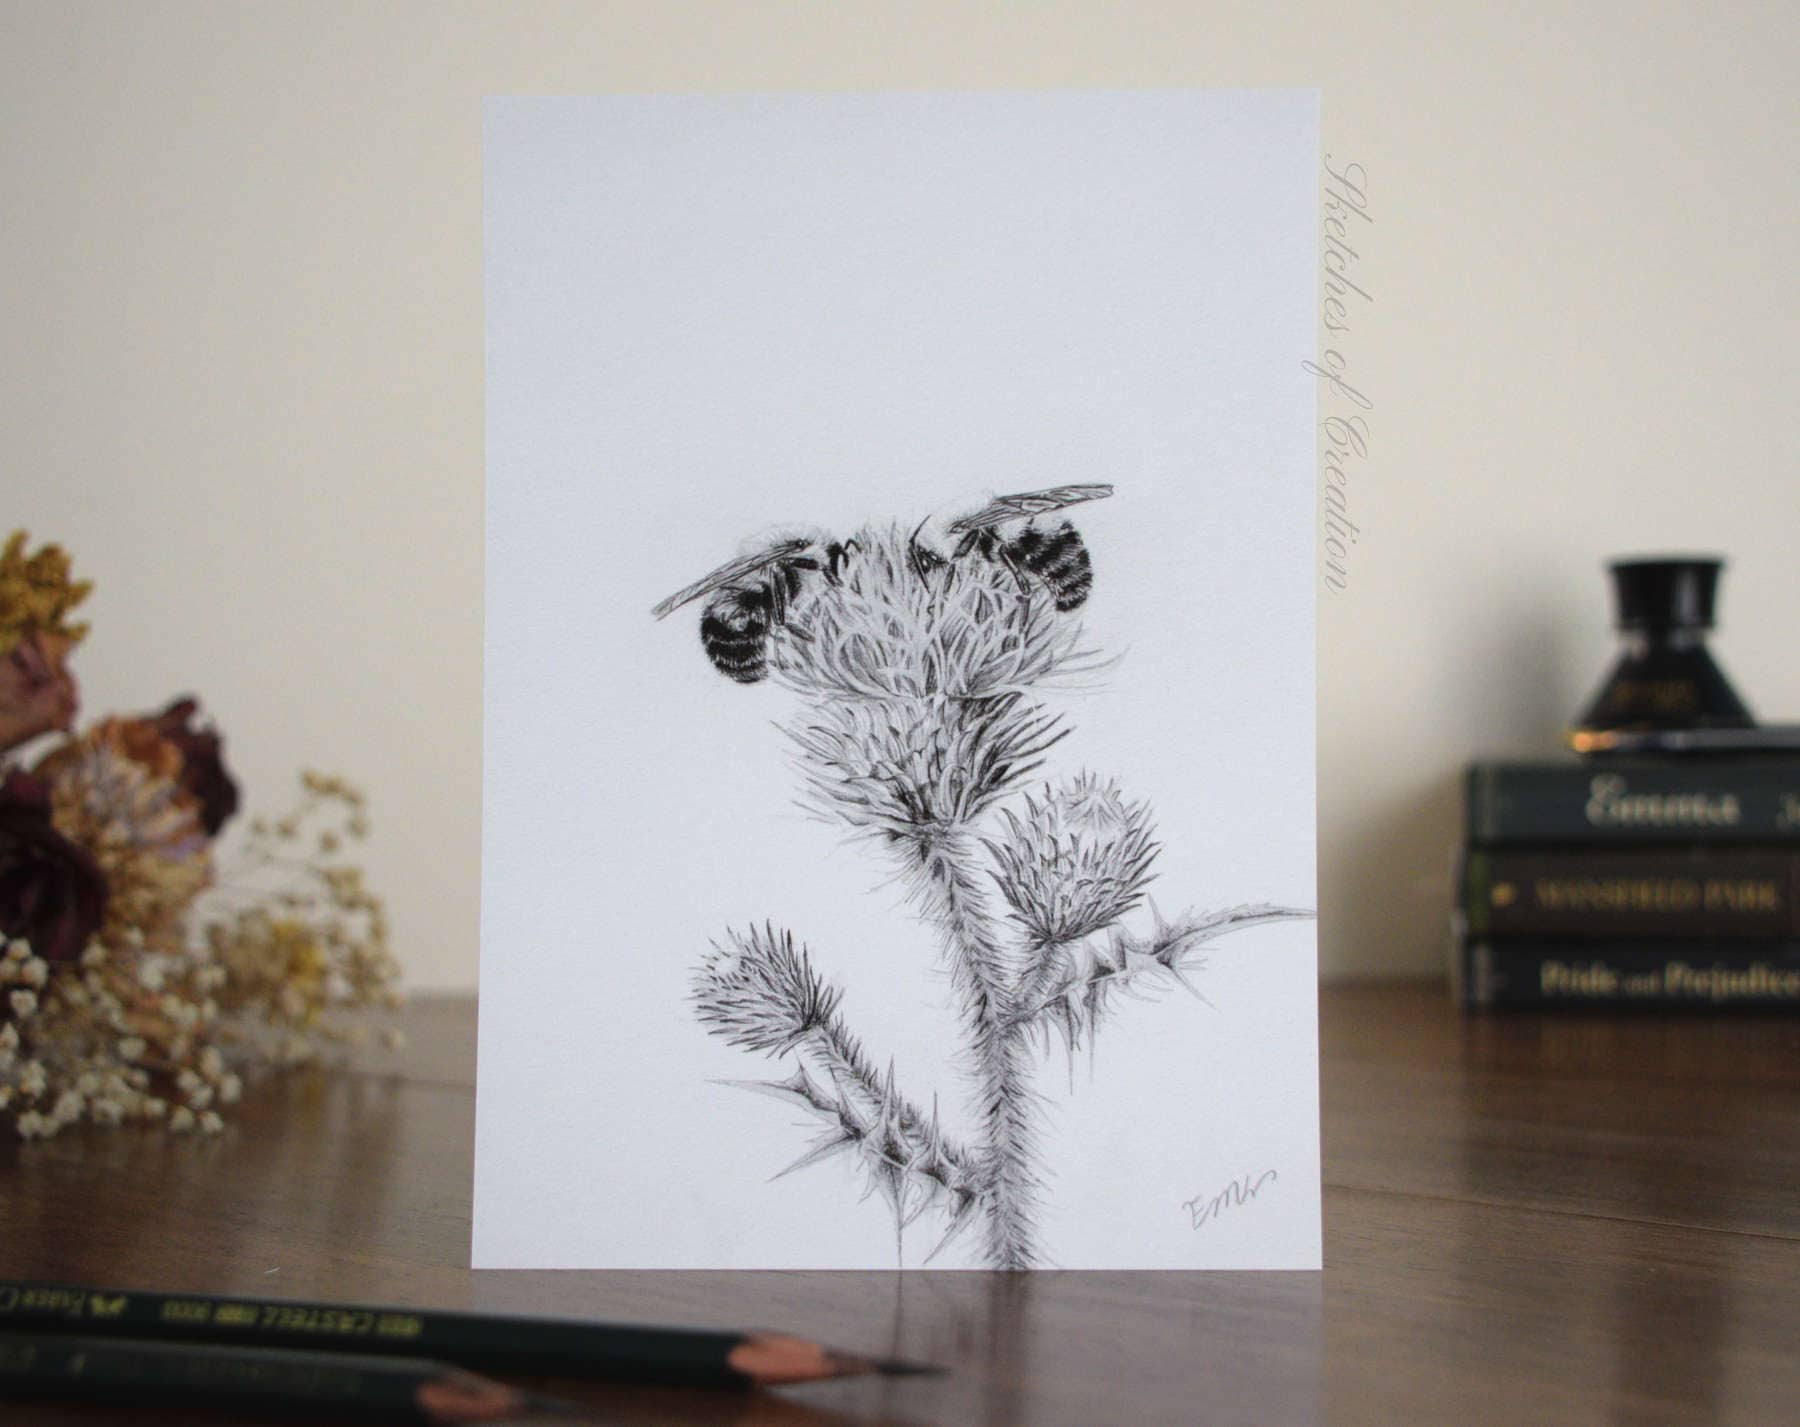 A print of two bees on a thistle flower